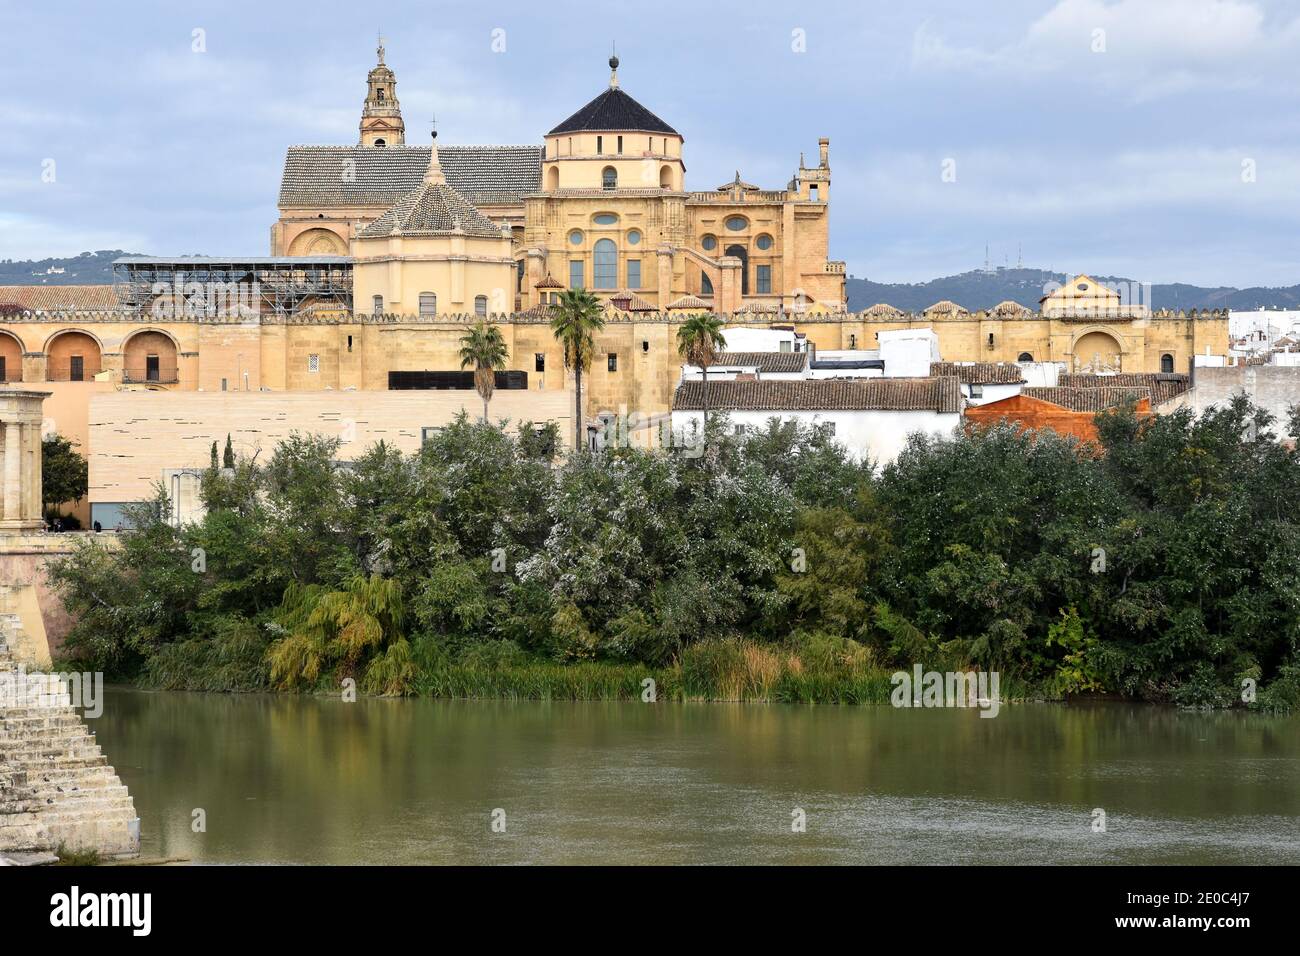 Spain, Cordoba, the Mosaque Cathedral was built on the 7th century, in 1236 at the takeover of the city to muslins, castillans make it again a chuch. Stock Photo